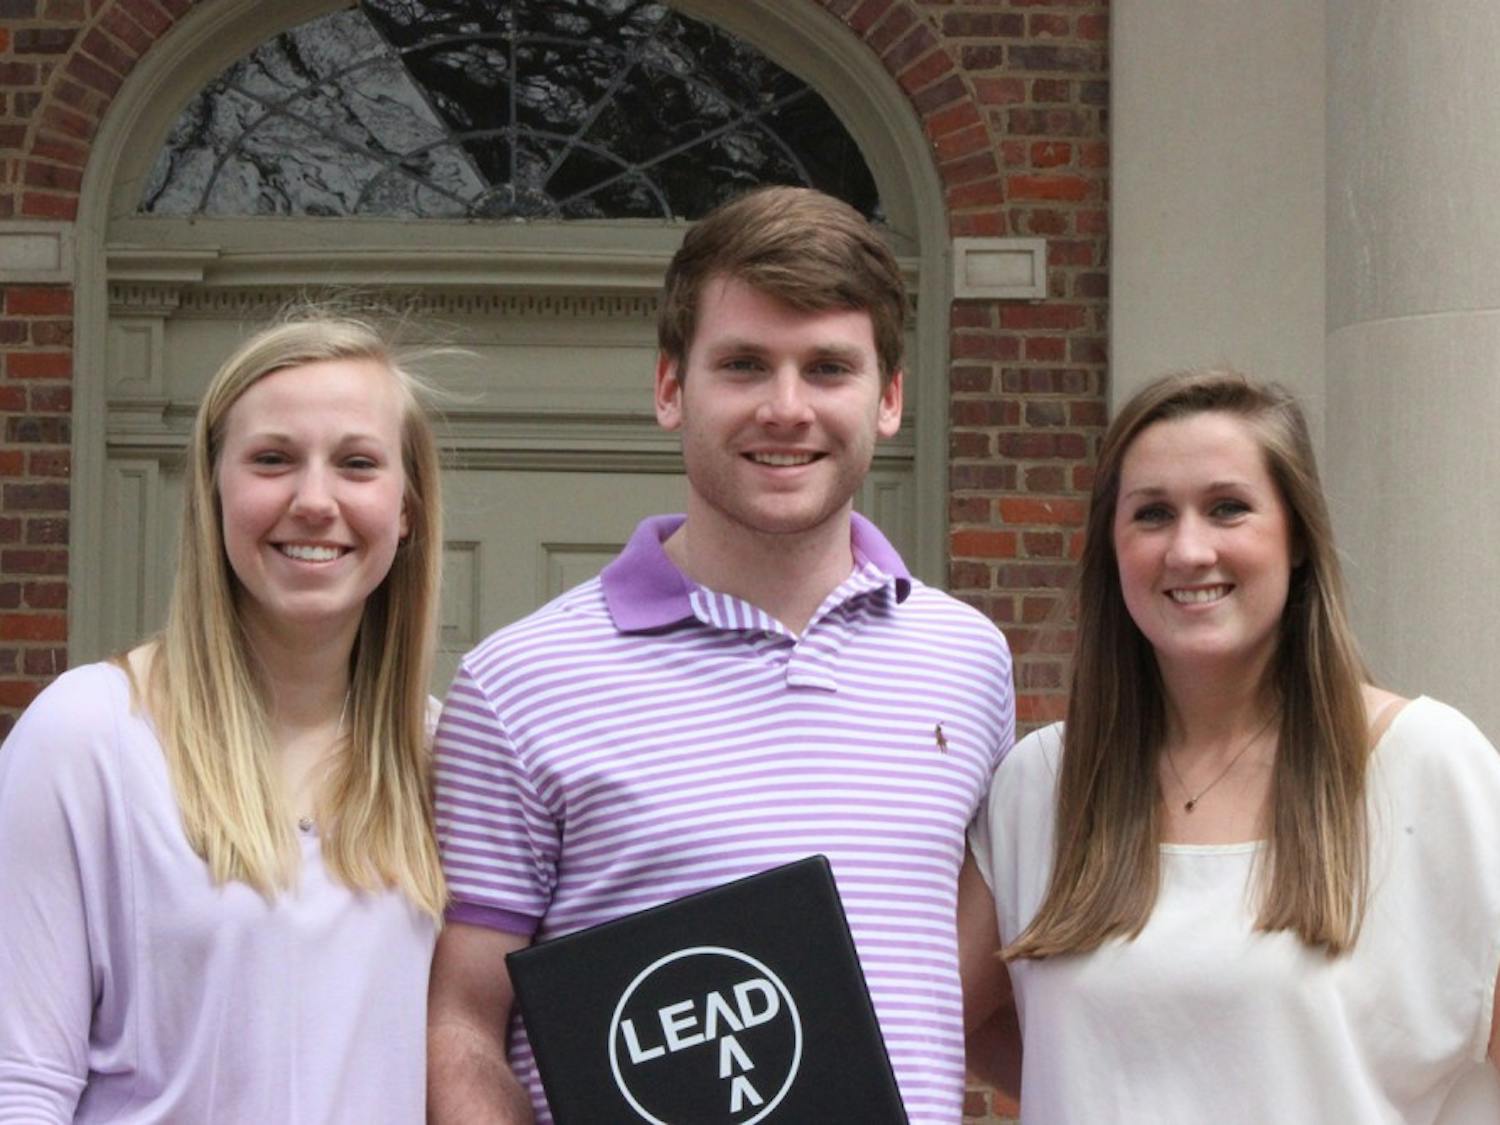 Sydney Browder, a freshman biology major from Rocky Mount, Eric Blaser, a junior business major from Burlington, and Kate Gray, a senior Psychology and French double major from Rocky Mount, meet each week with others for the new club LEAD. Gray says she started LEAD to encourage and facilitate students, especially freshmen, in meeting their longterm professional and personal needs.